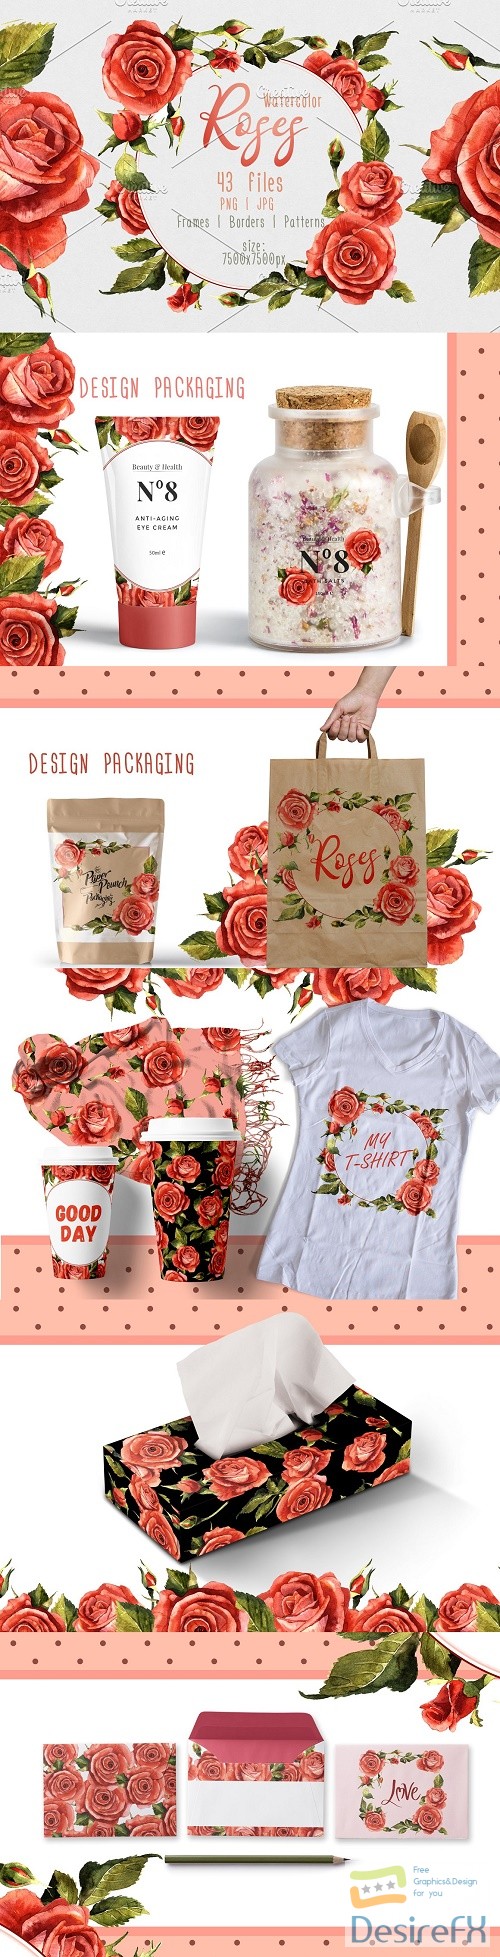 Red Roses PNG Watercolor Flower Set - 2392783